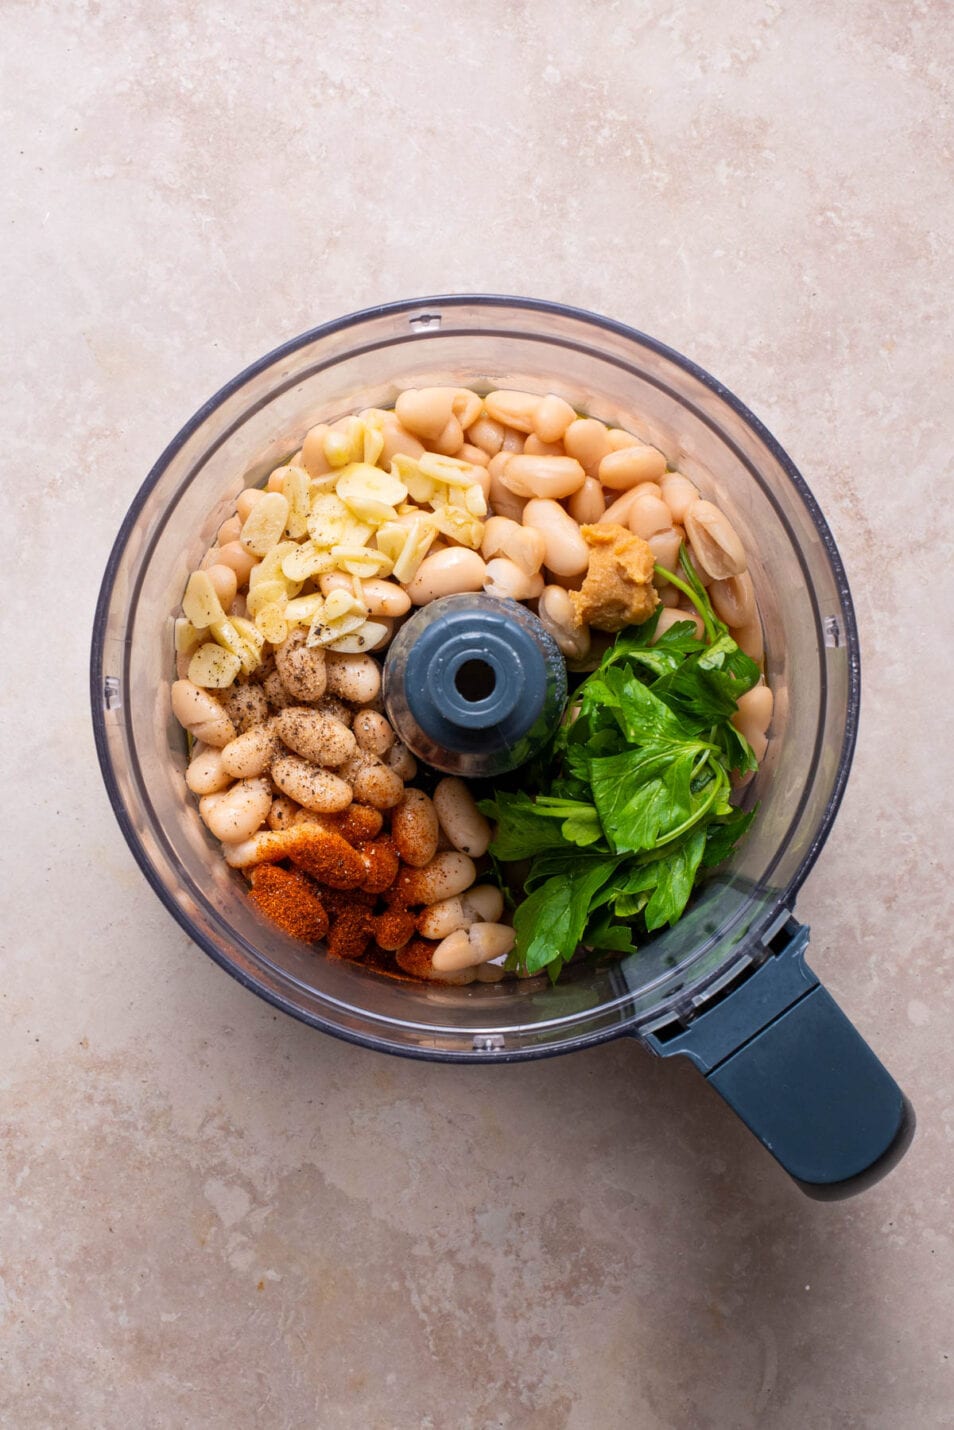 Ingredients to make cannellini bean dip combined in a food processor.